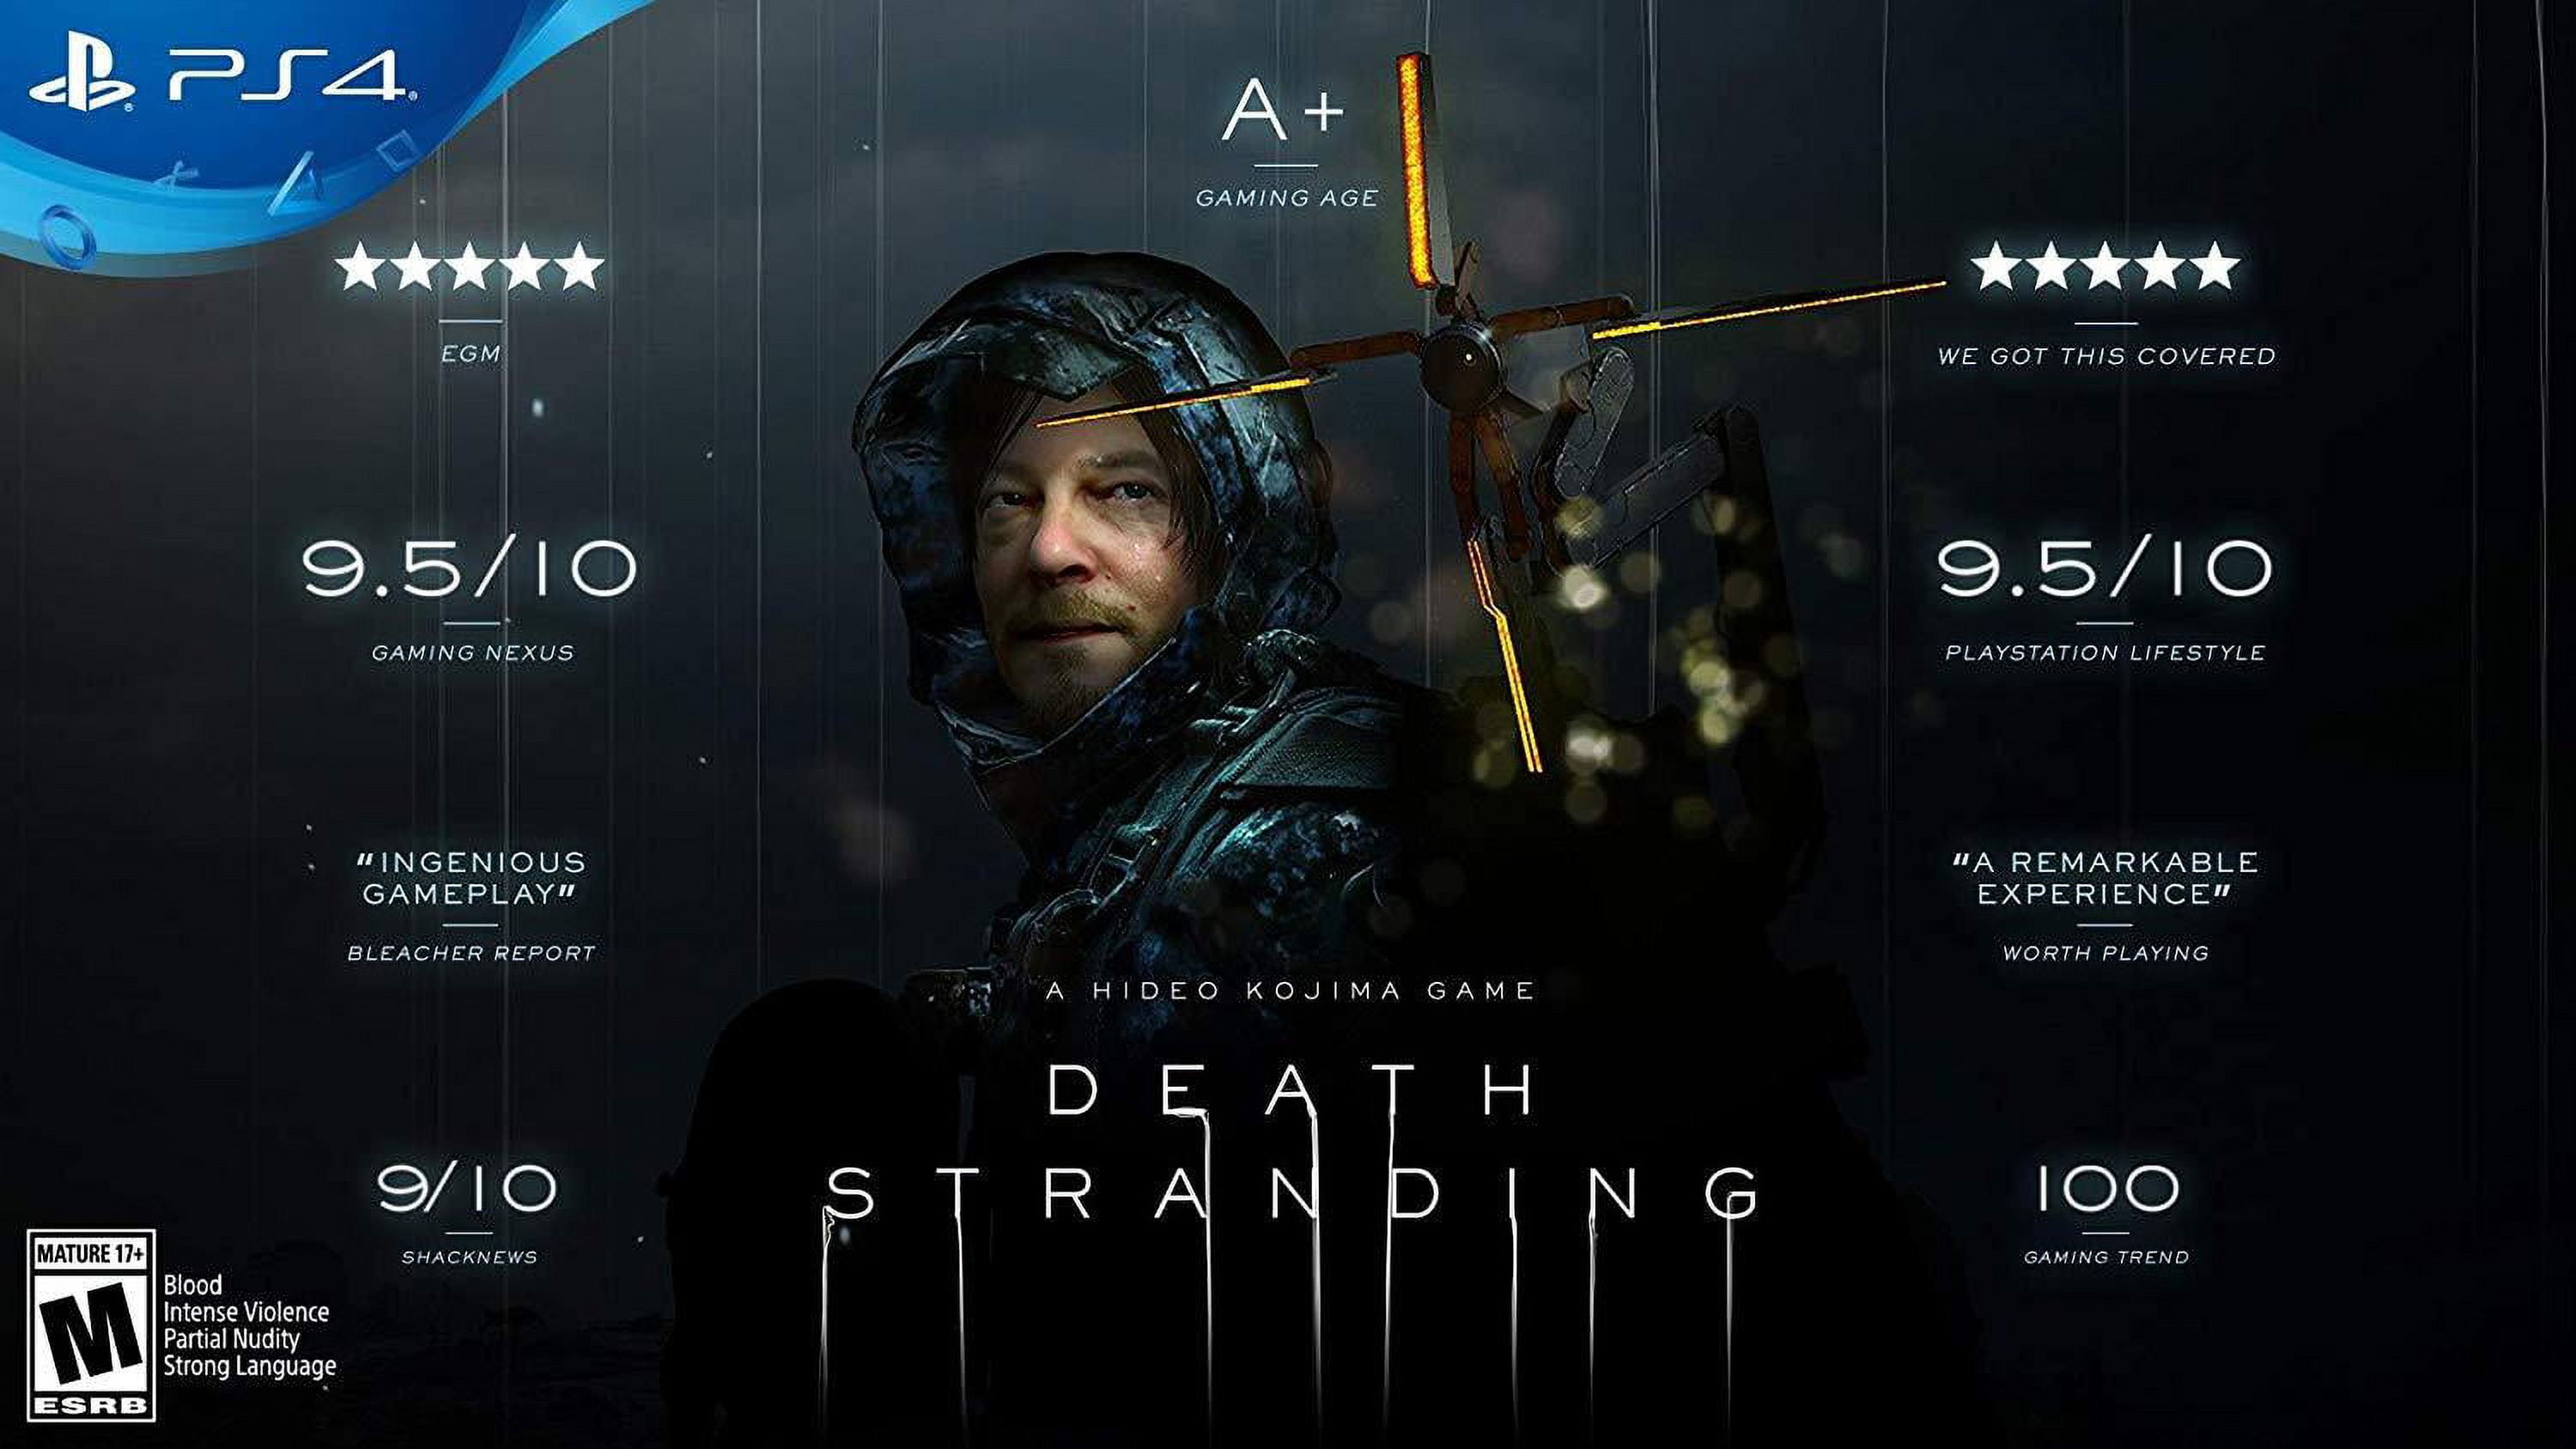 PS4 - Death Stranding Sony PlayStation 4 W/ Steelbook No DLC #500 –  vandalsgaming